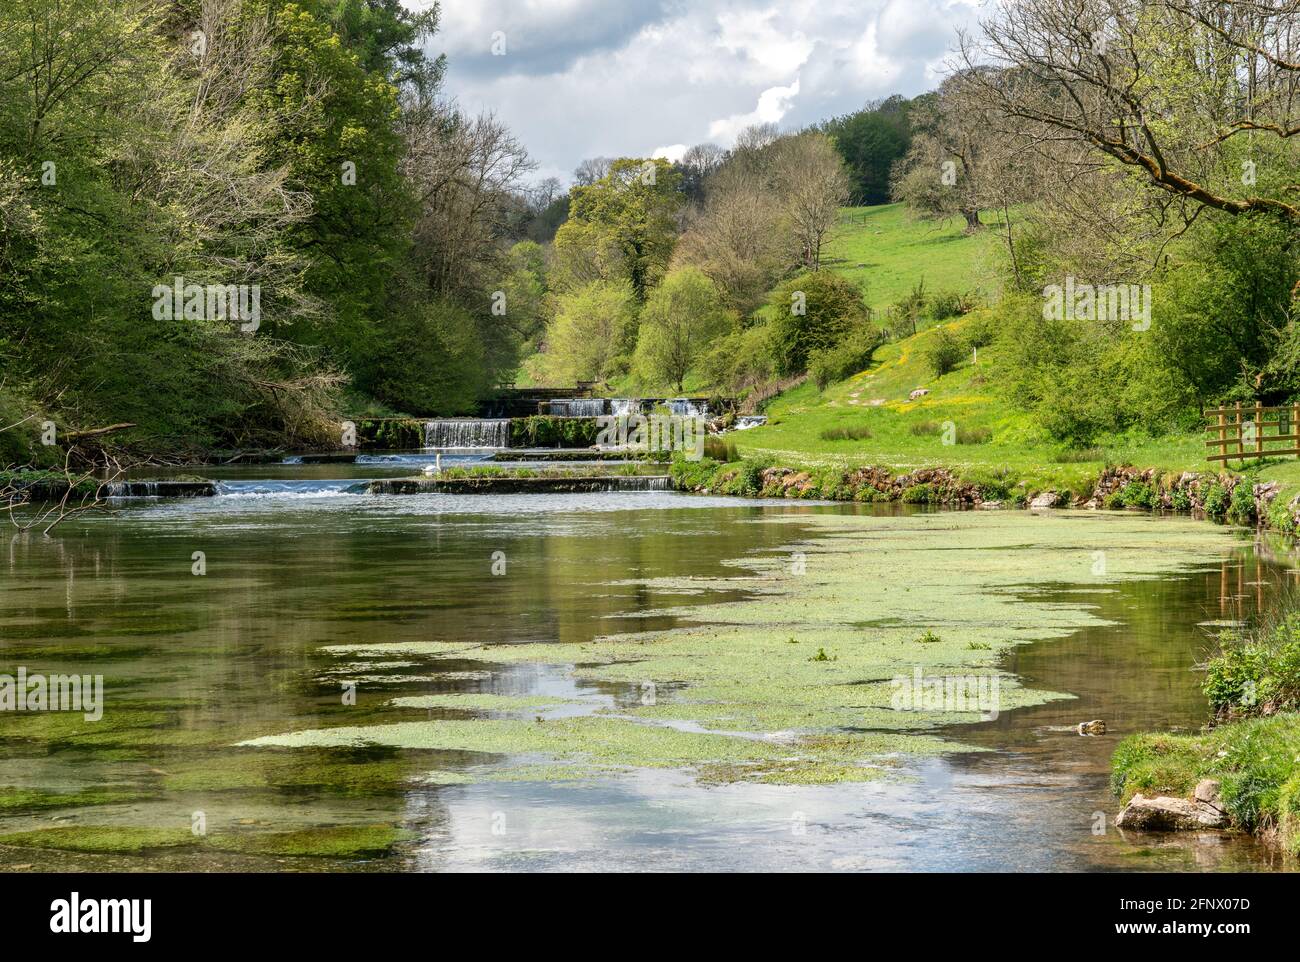 Water meads weirs and trout pools along the lower reaches of Lathkill Dale in the Derbyshire Peak District UK Stock Photo